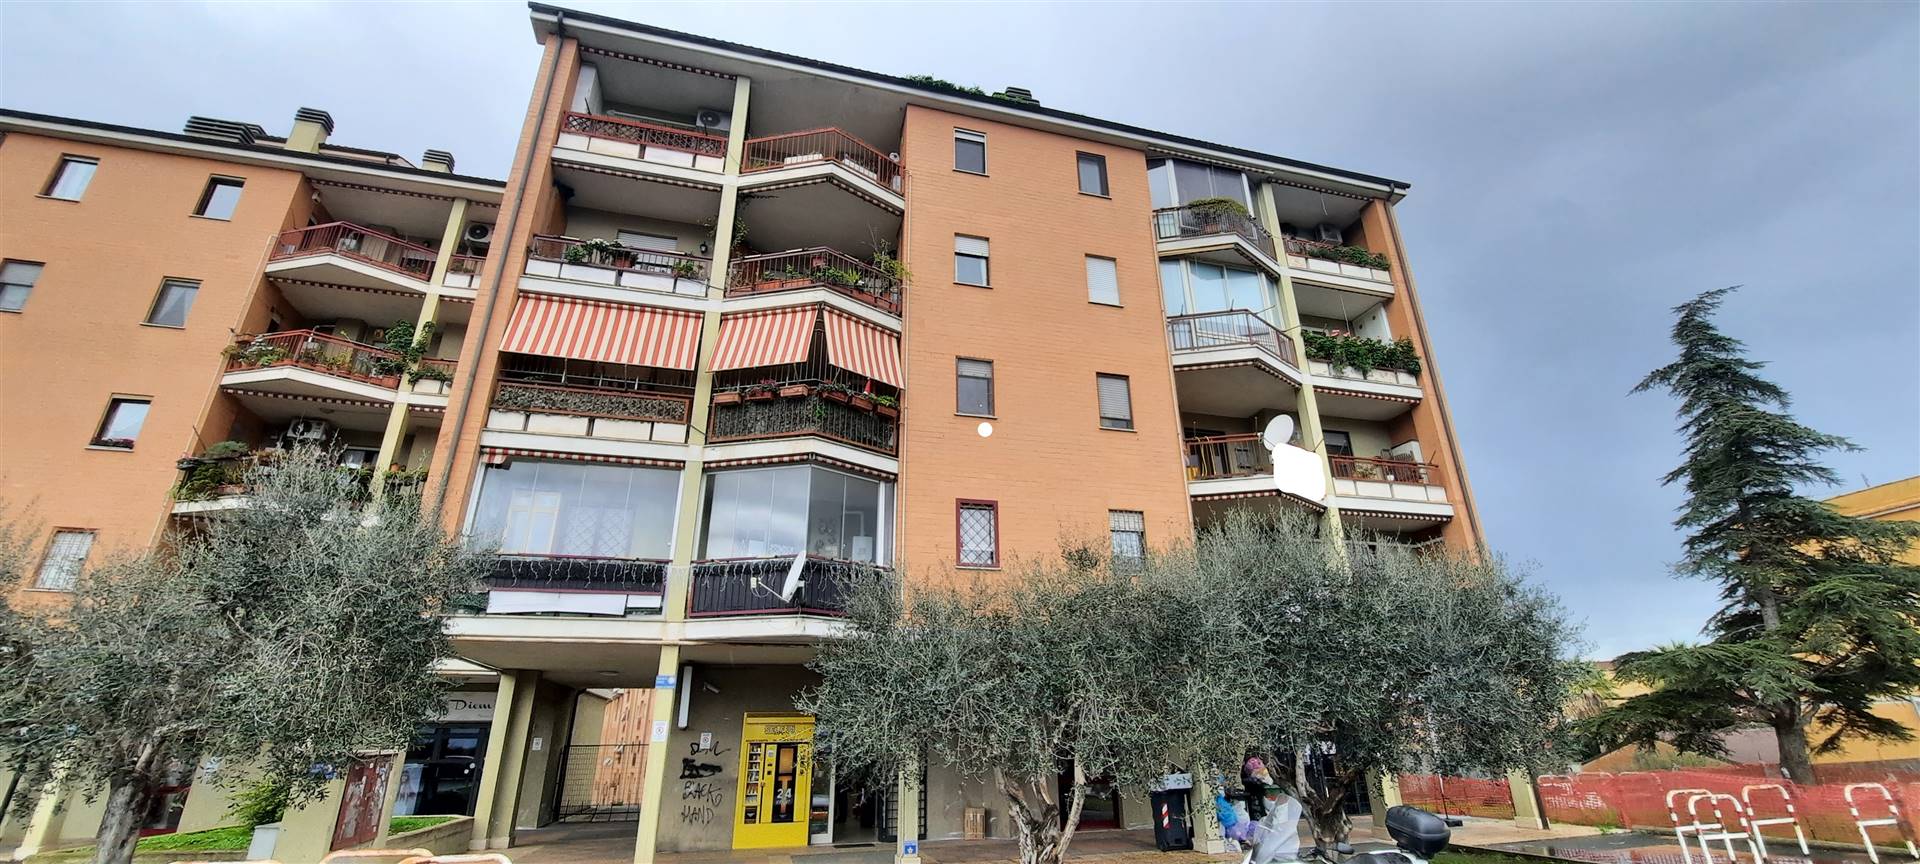 CASAL LUMBROSO, ROMA, Apartment for rent of 100 Sq. mt., Excellent Condition, Heating Individual heating system, Energetic class: G, Epi: 175 kwh/m2 